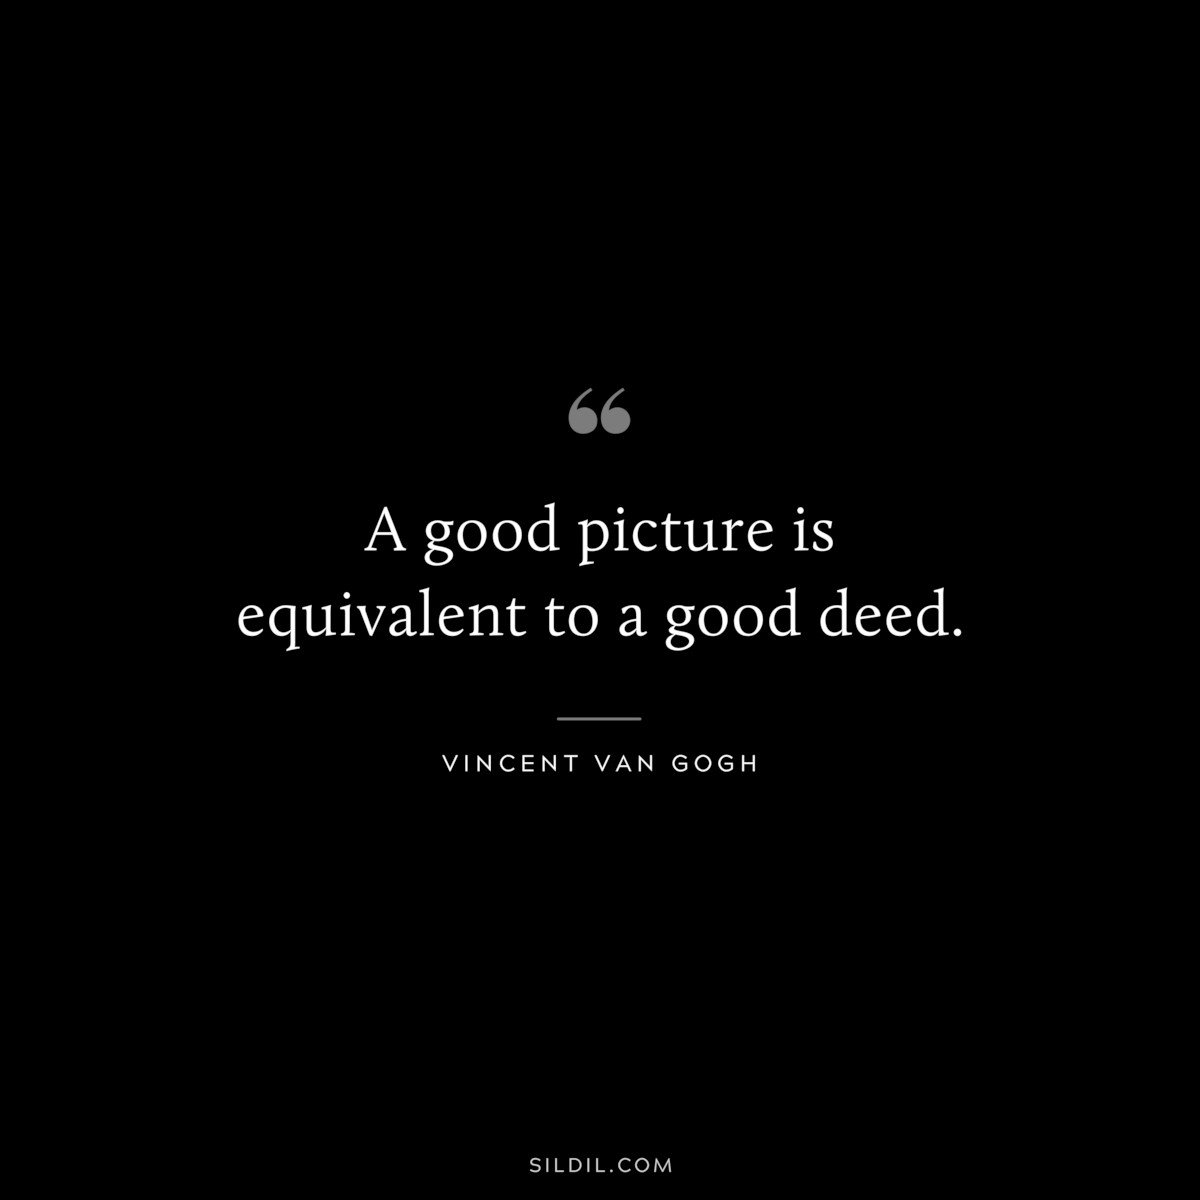 A good picture is equivalent to a good deed. ― Vincent van Gogh